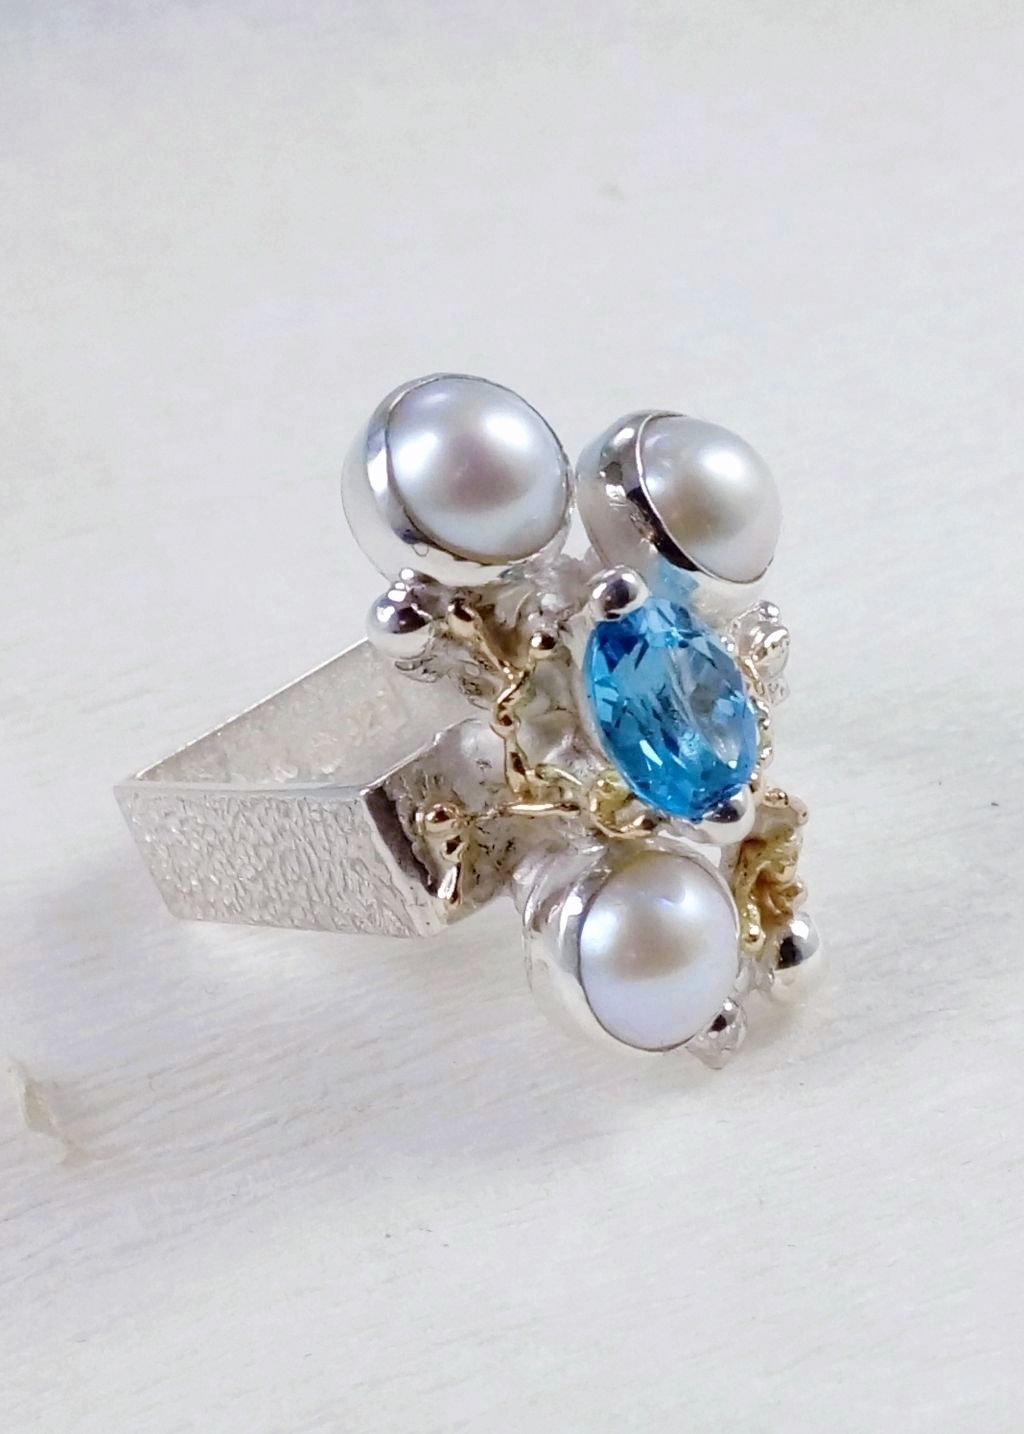 designer jewellery and handmade artisan jewellery at auctions and in galleries, Gregory Pyra Piro artian reticulated mixed metal square ring #8391, designer jewellery and fine jewellery at auctions, ring in sterling silver, ring in 14 karat gold, ring with blue topaz, ring with pearls